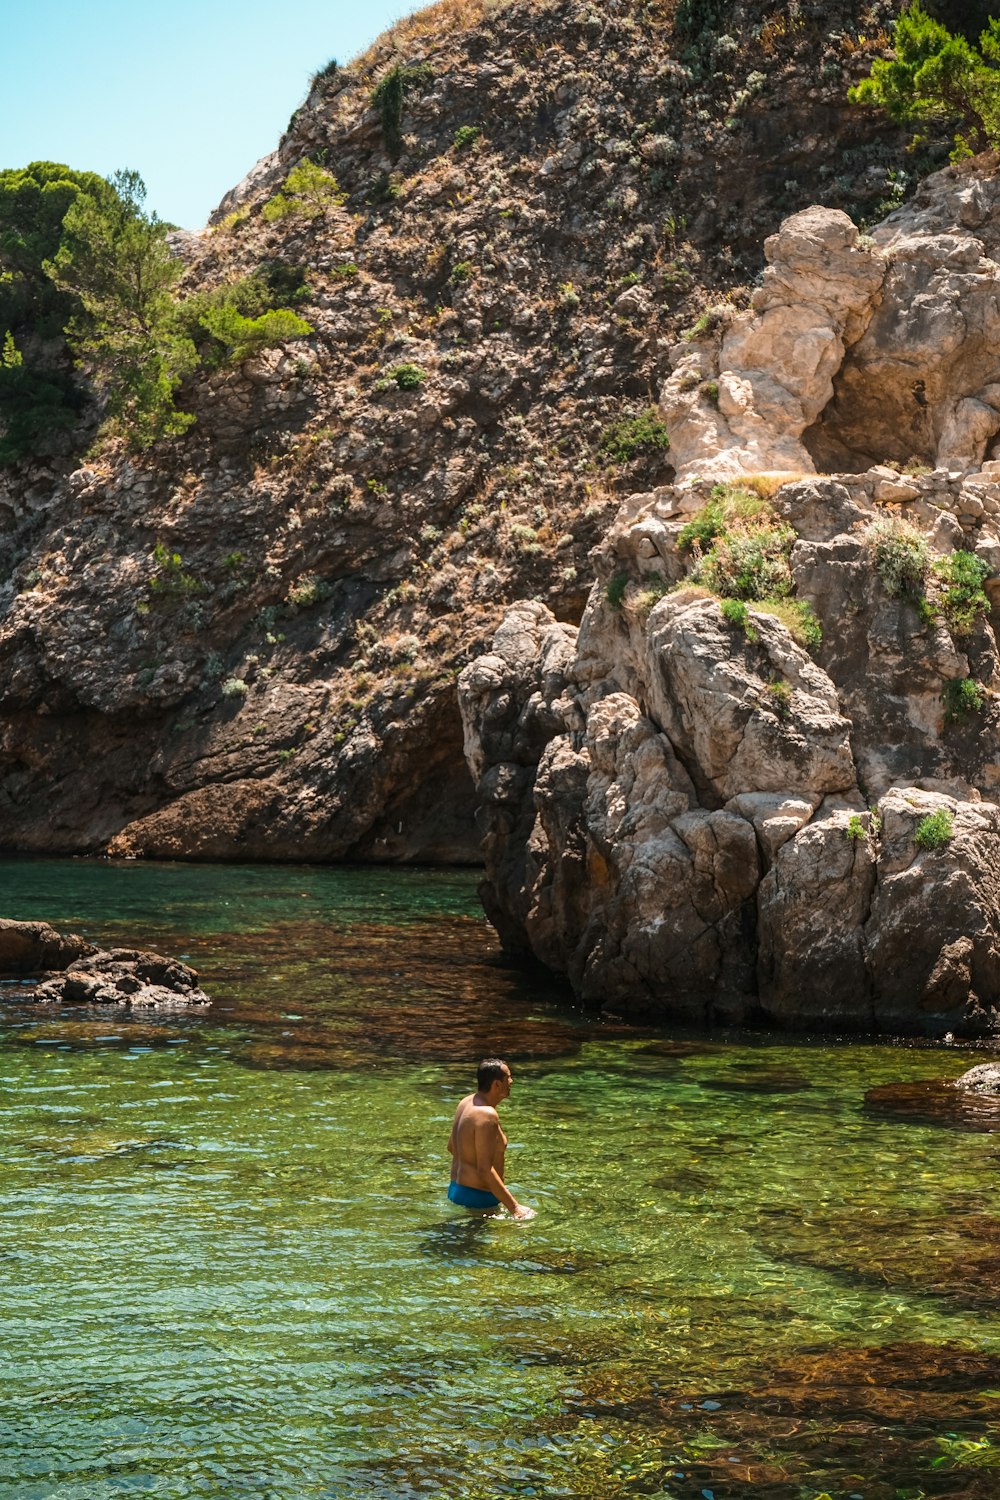 a man wading in the water near a rocky cliff